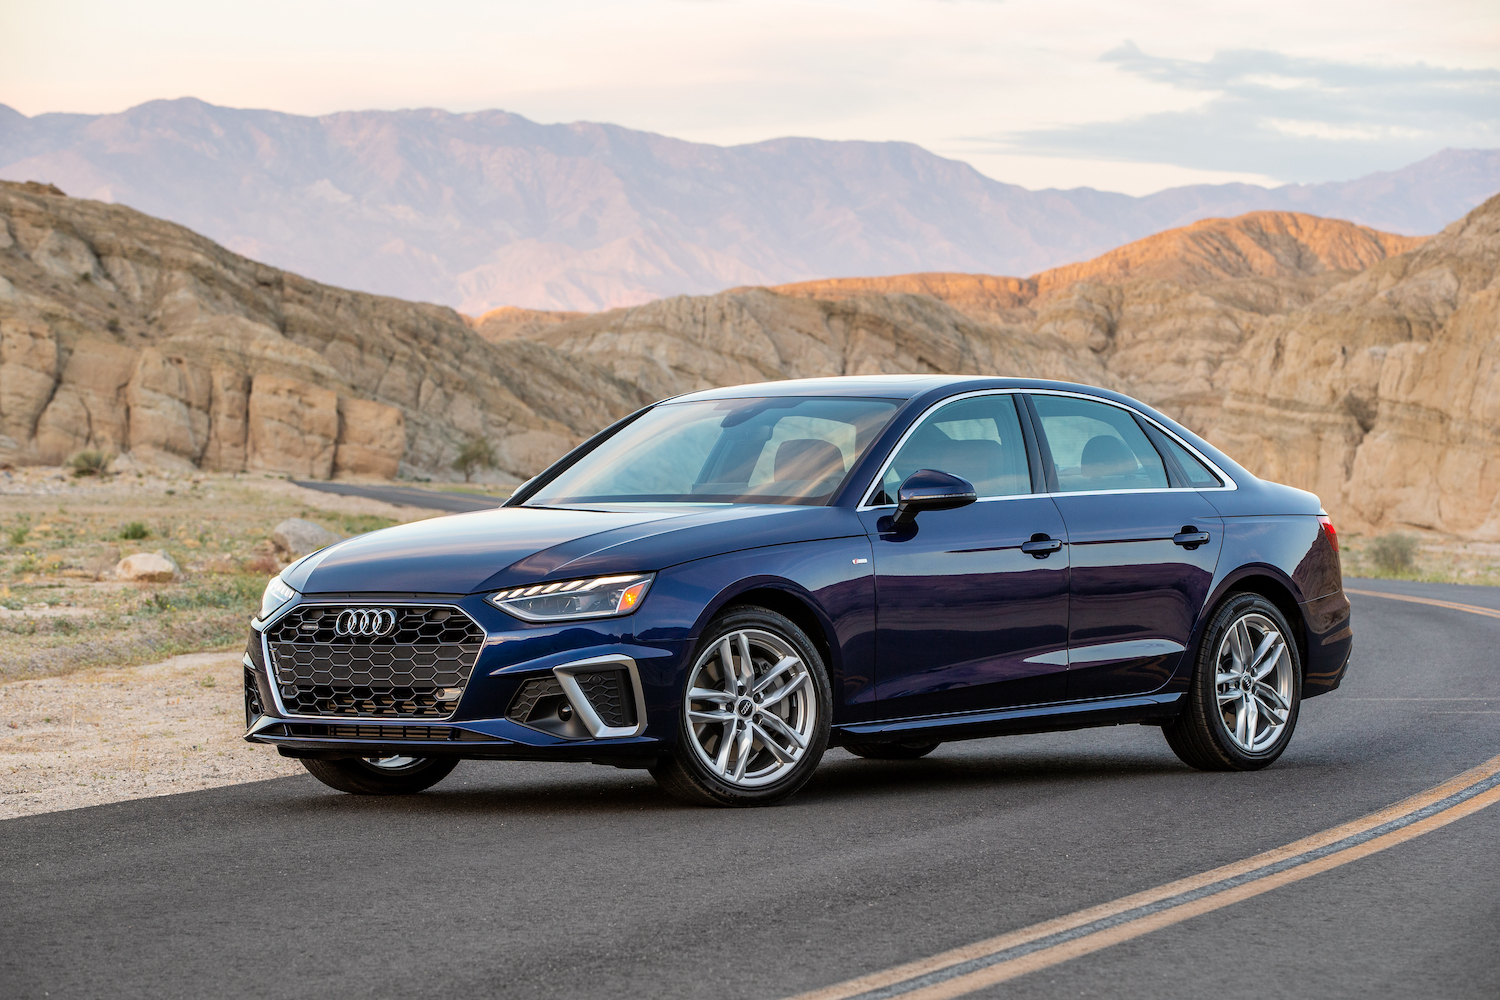 A 2021 Audi A4 parked on the side of the road with mountains and desert behind it, the 2021 Audi A4 is an AWD sedan